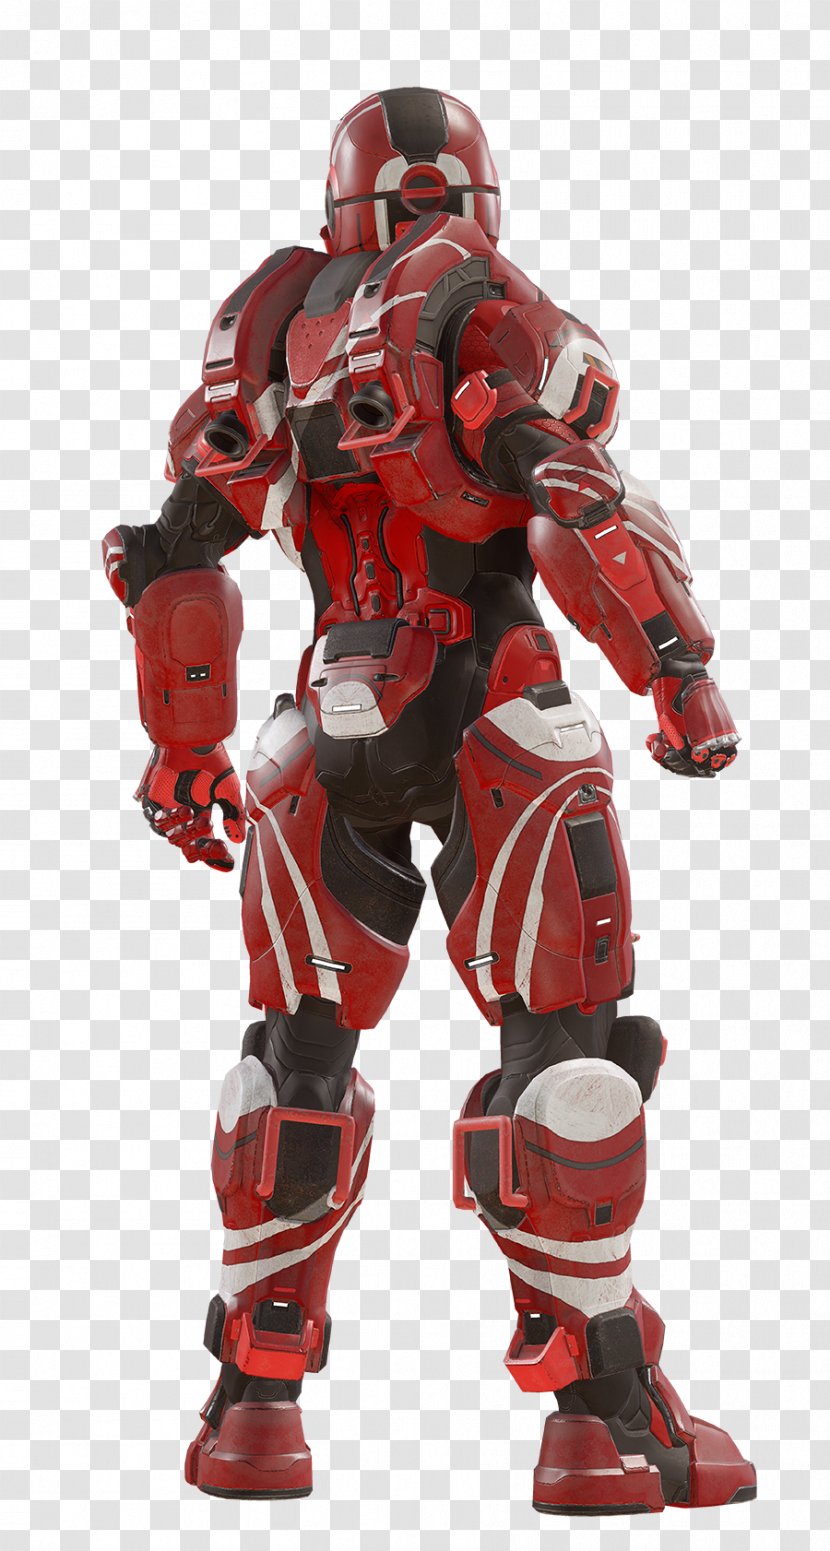 Halo 5: Guardians 4 Master Chief Halo: Reach Armour - Toy Transparent PNG